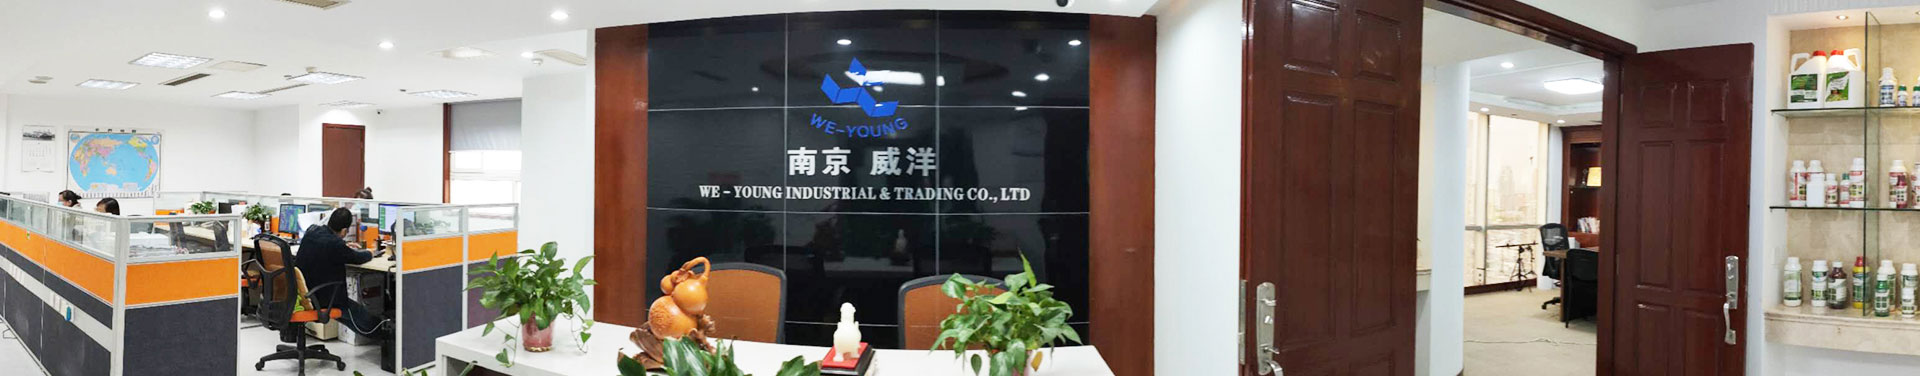 We-Young Industrial & Trading Co., Ltd.